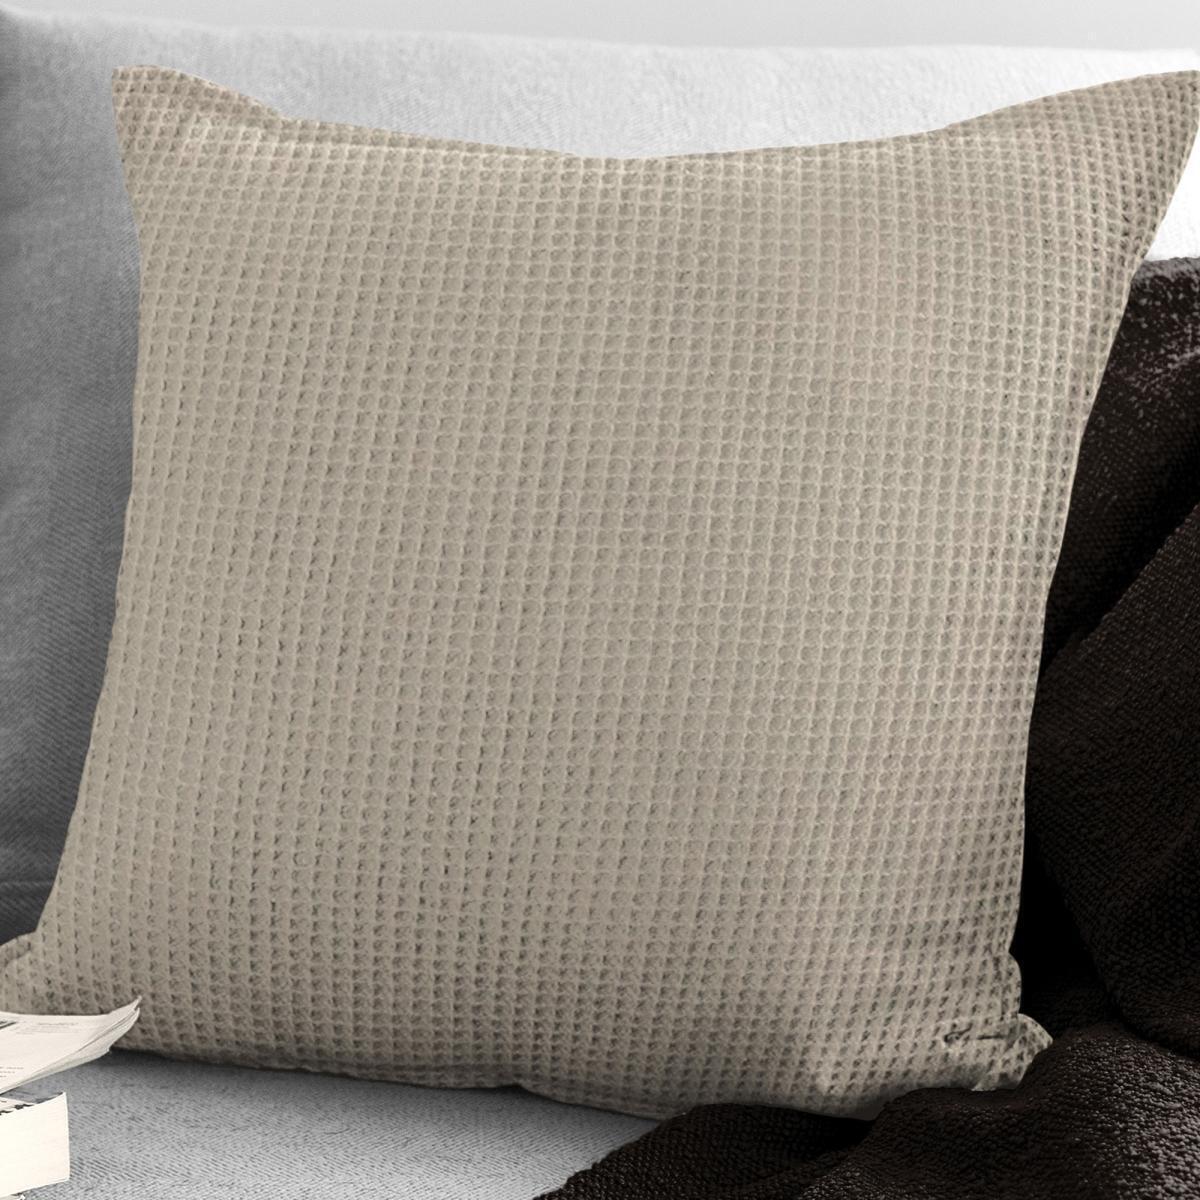 6ix Tailors CLA-SOM-NAT-CFT-20SQ Classic Waffle Square Decor Pillow with Feather Insert, Natural - 20 in.